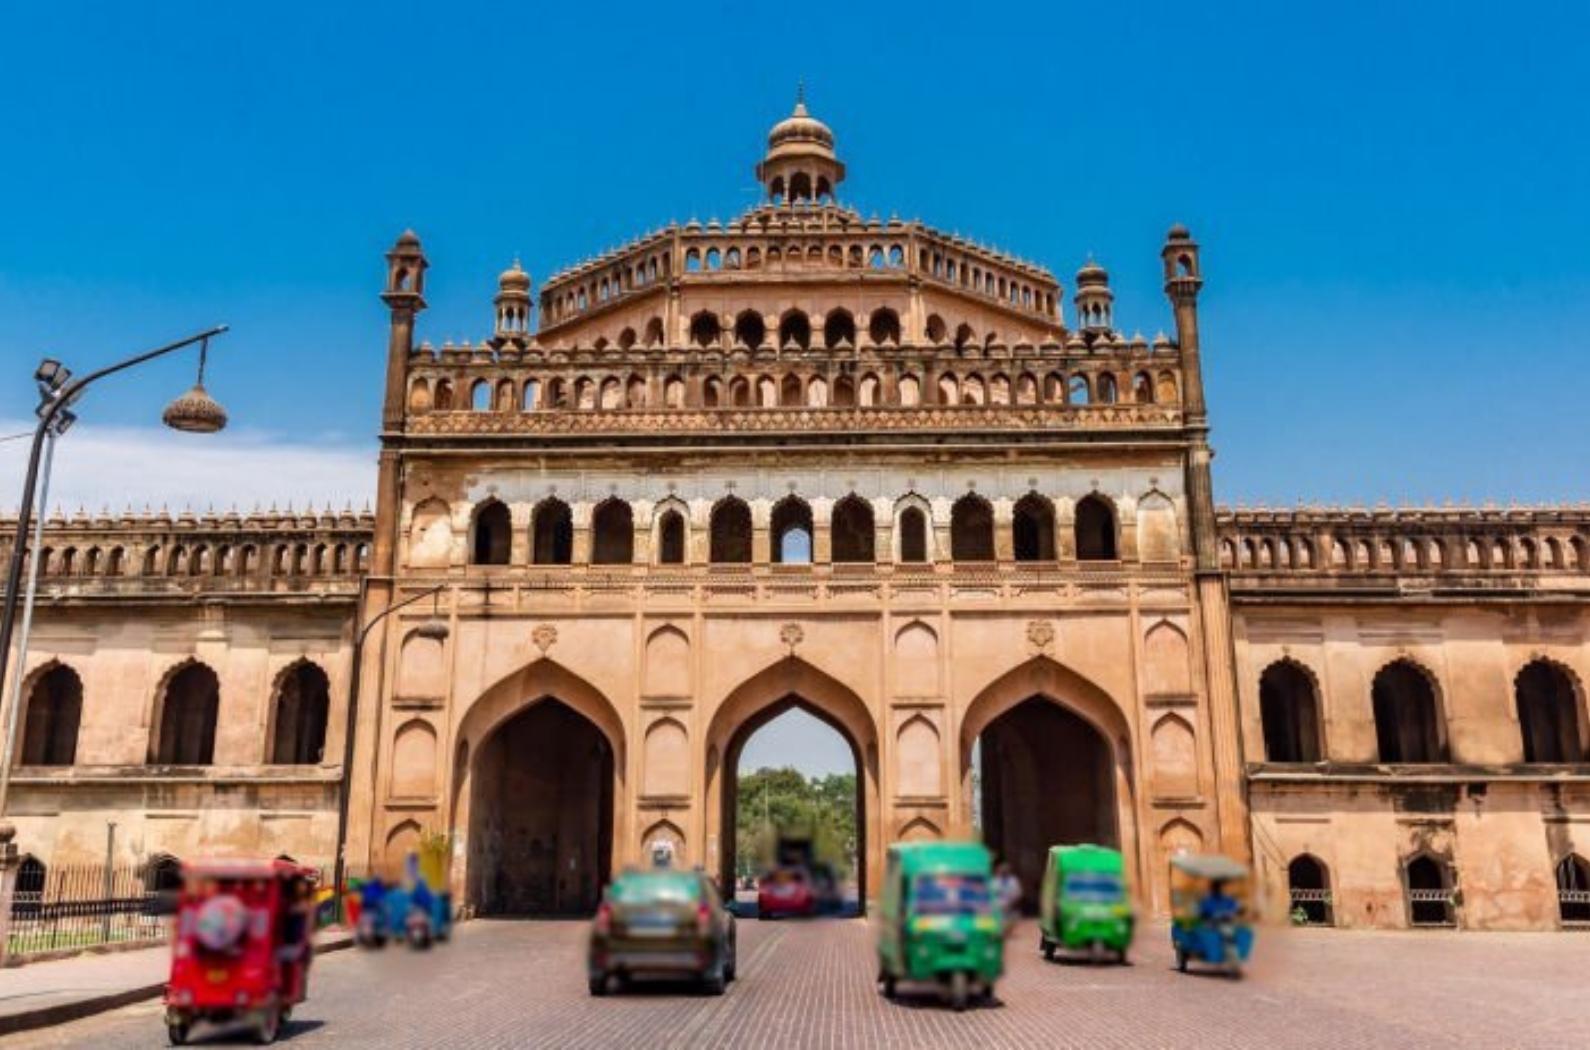 This pic shows the famous monument Rumi Darwaza Turkish Gate in Lucknow, Uttar Pradesh.